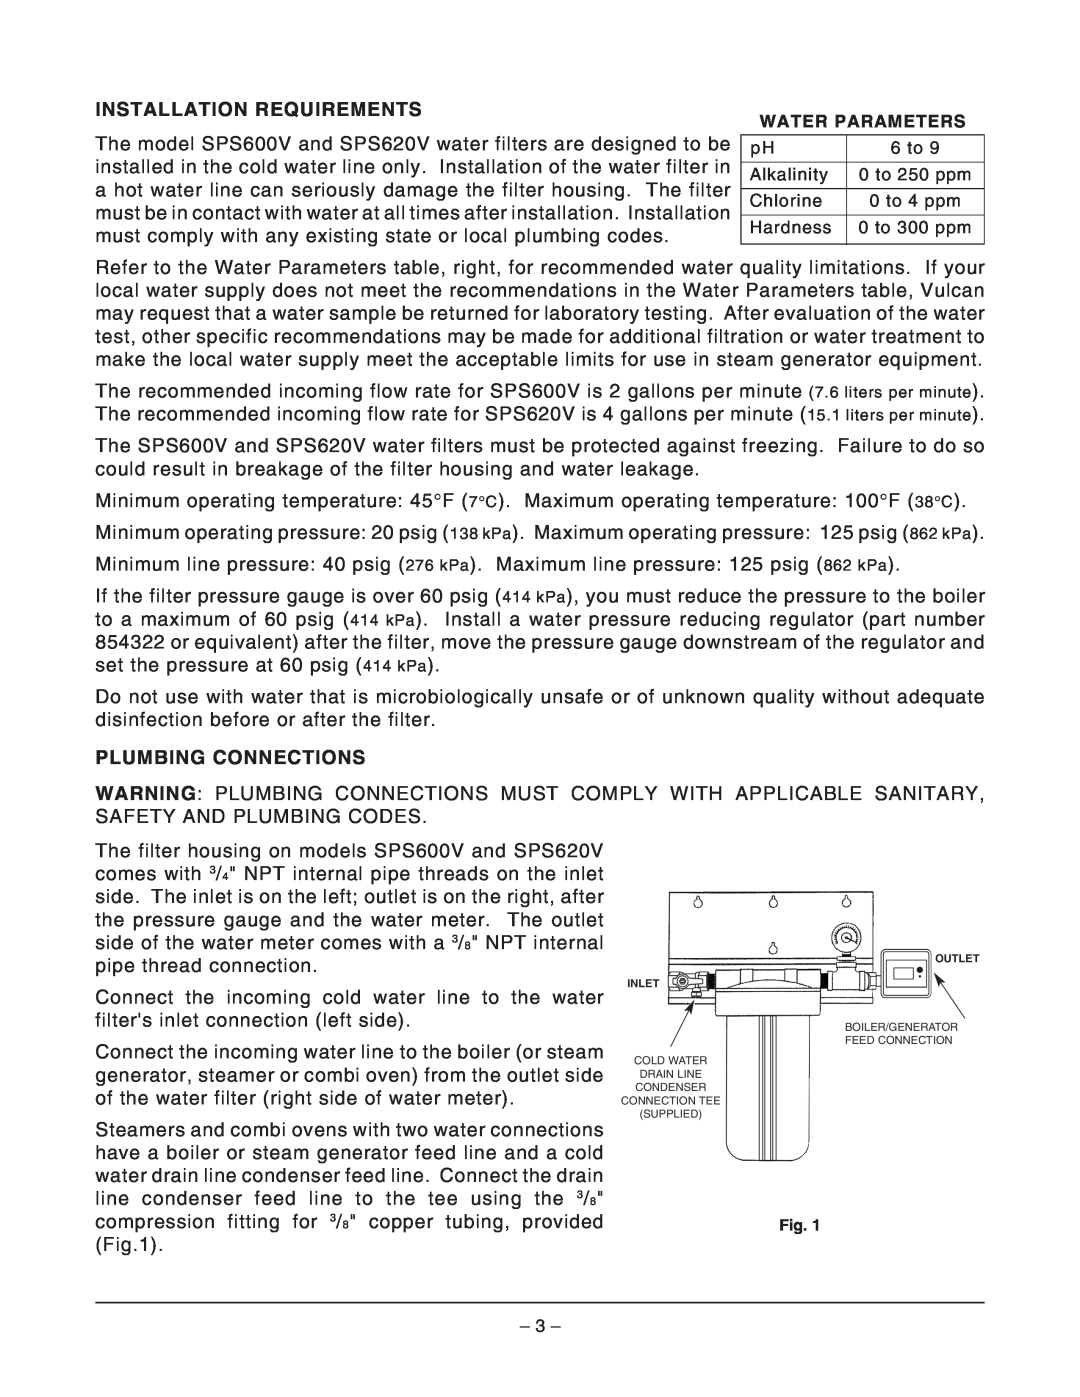 Vulcan-Hart SPS600V, SPS620V operation manual Installation Requirements, Plumbing Connections 